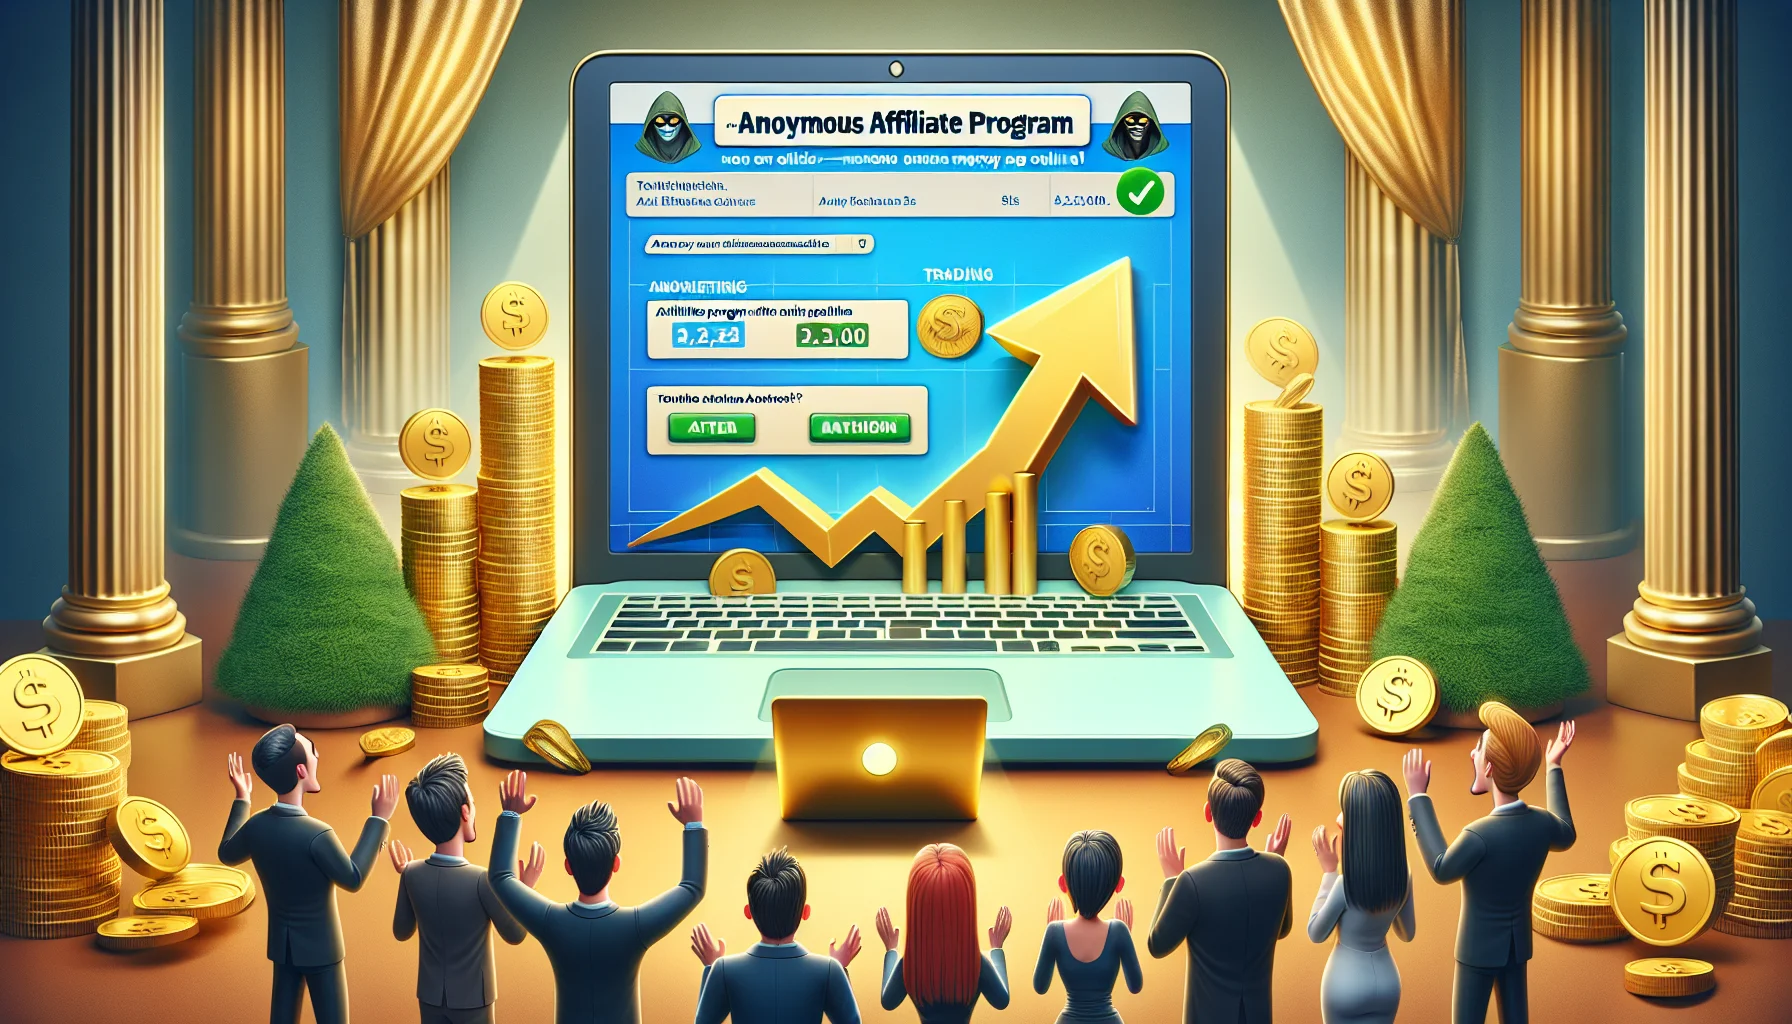 Create a humorous and realistic image that showcases an anonymous affiliate program, similar to one that might be found on a website dedicated to tracking online product launches. The scene is enticing and related to making money online. The main focus is on a huge monitor screen displaying rising graphs and charts indicating successful affiliate marketing. Maybe there's a golden laptop nearby, symbolizing the promise of online wealth. Add some caricatured users looking amazed and excited, all of different genders and descents, gazing at the monitor in awe. The overall tone is light-hearted, promising, and enticing.